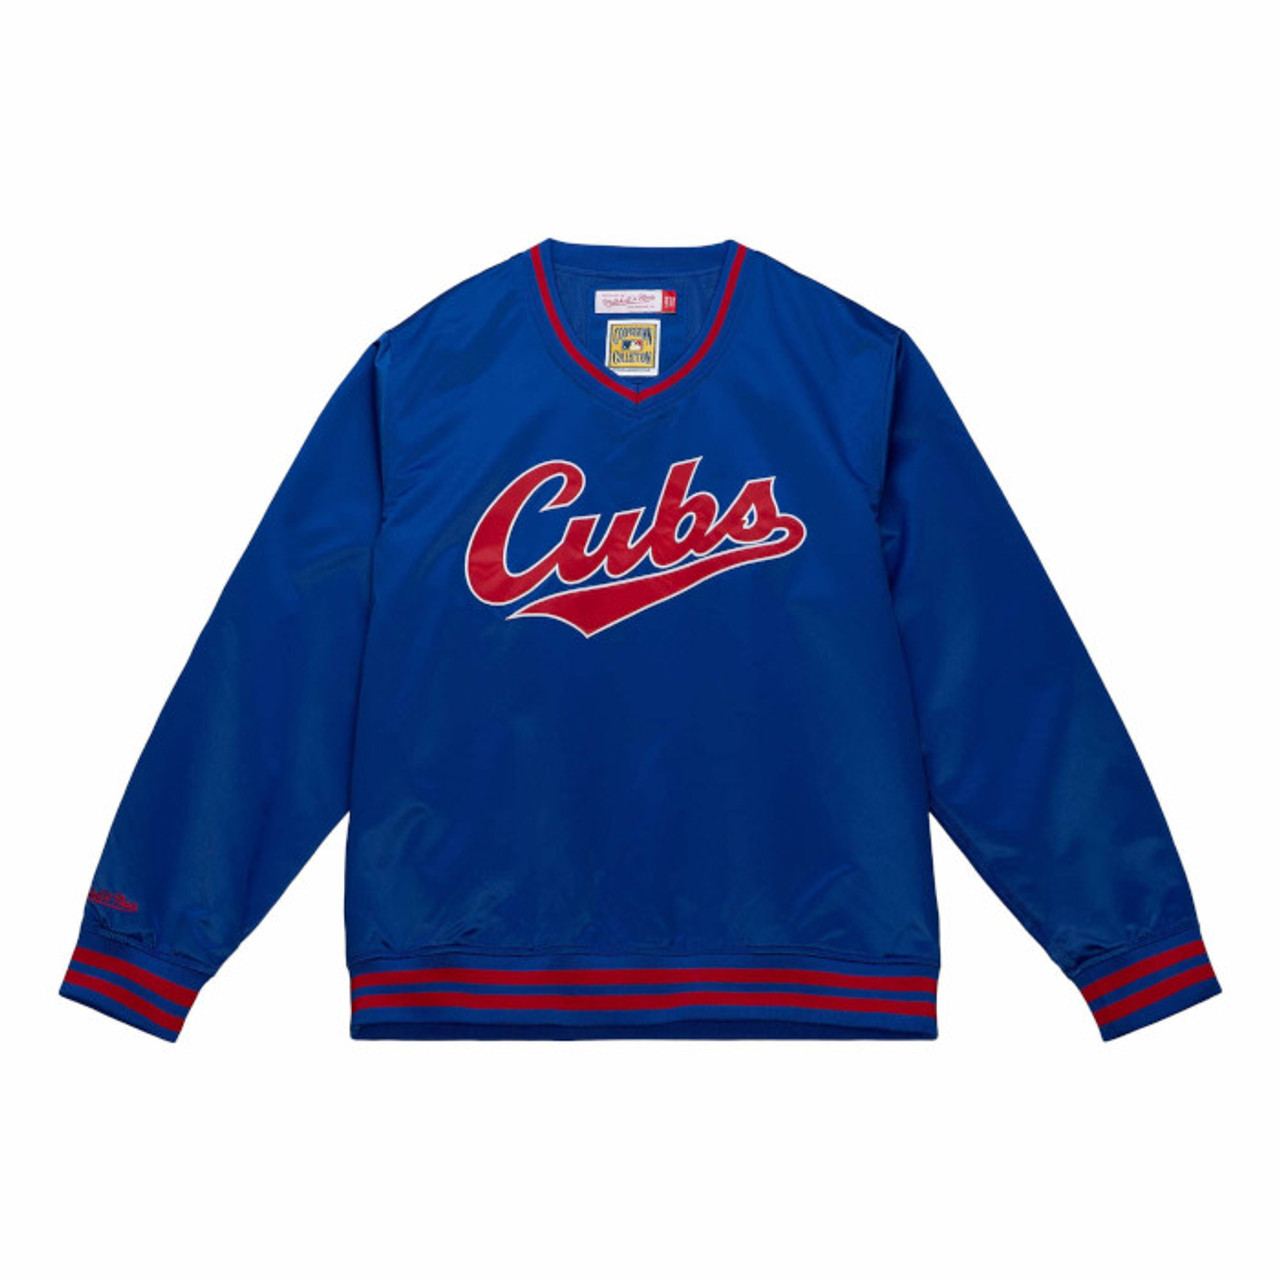 Men's Mitchell & Ness Chicago Cubs Legend Slub Henley Red and